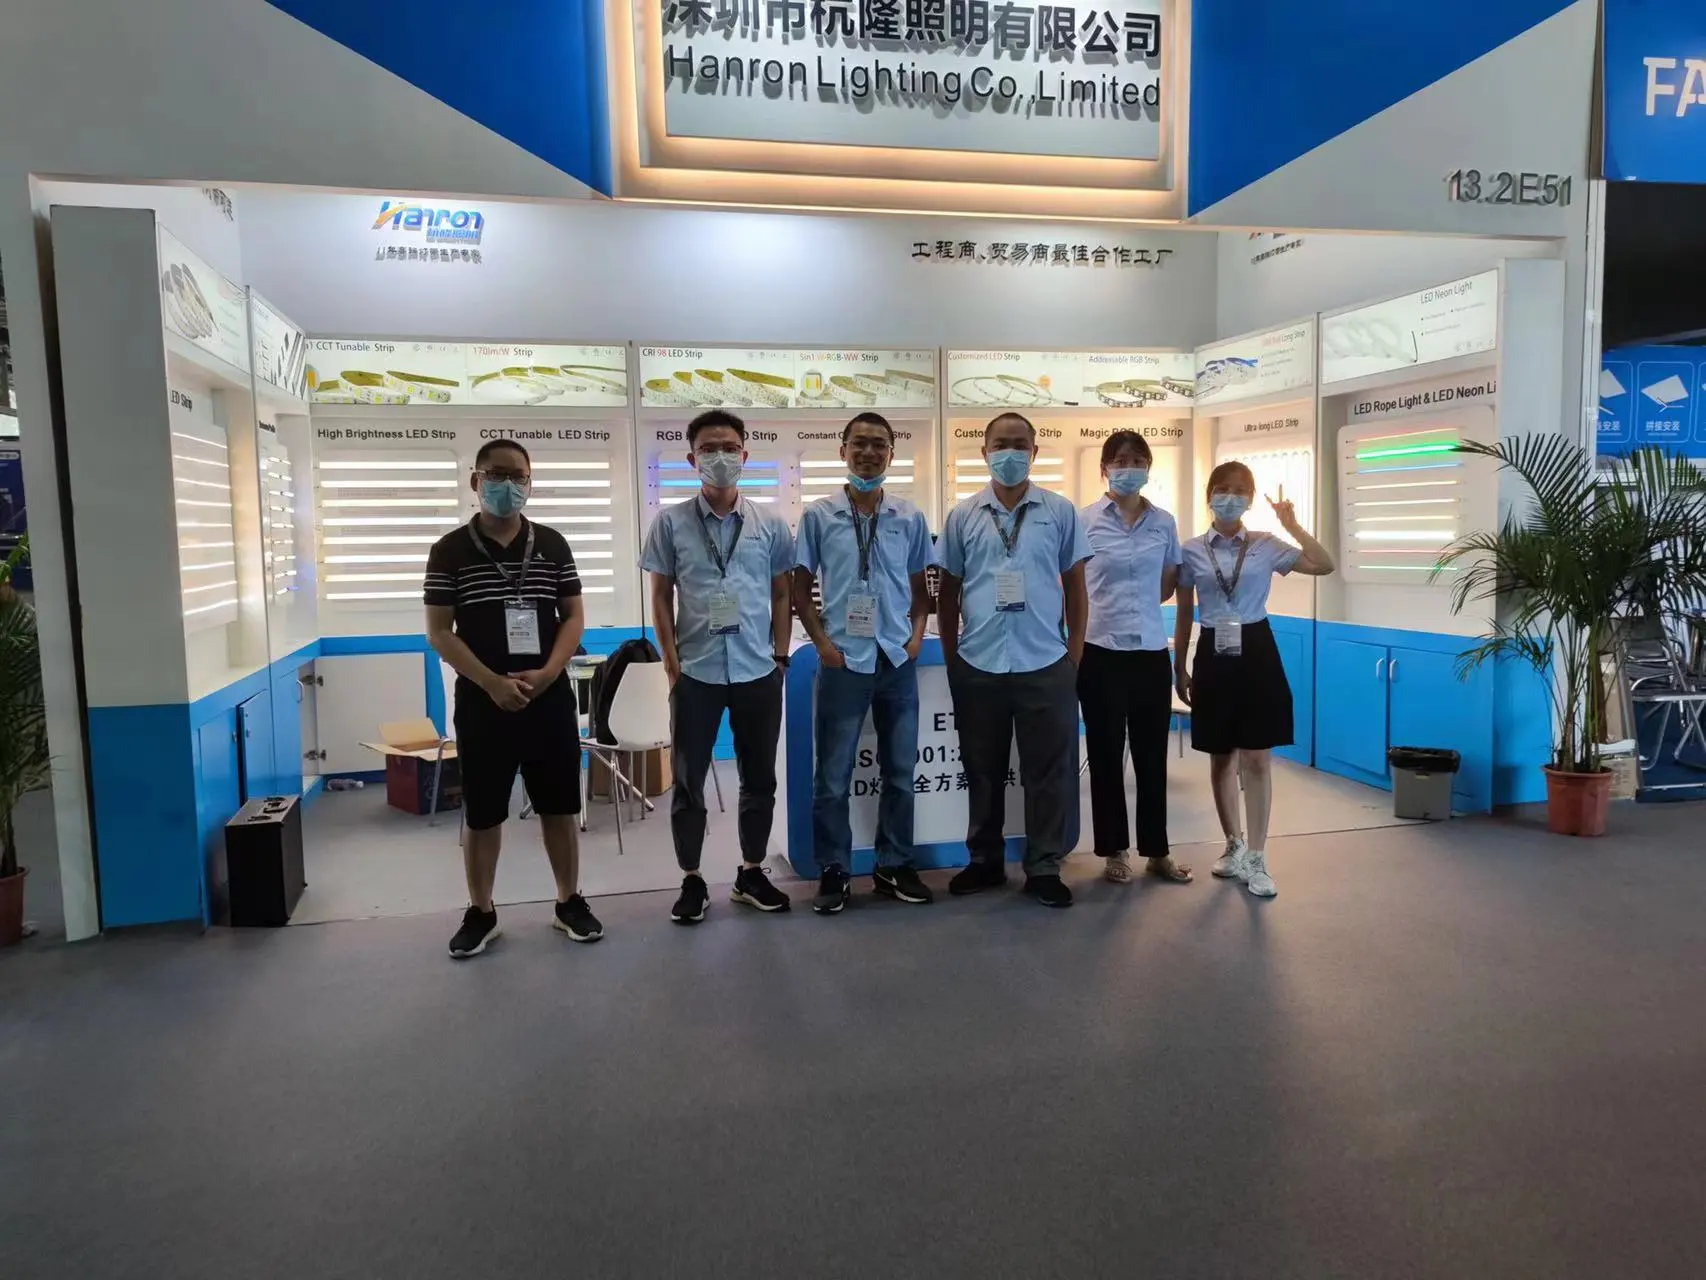 Exhibition Review: Hanron LED Products Appeared at GILE Exhibition and attracted the attention of the industry